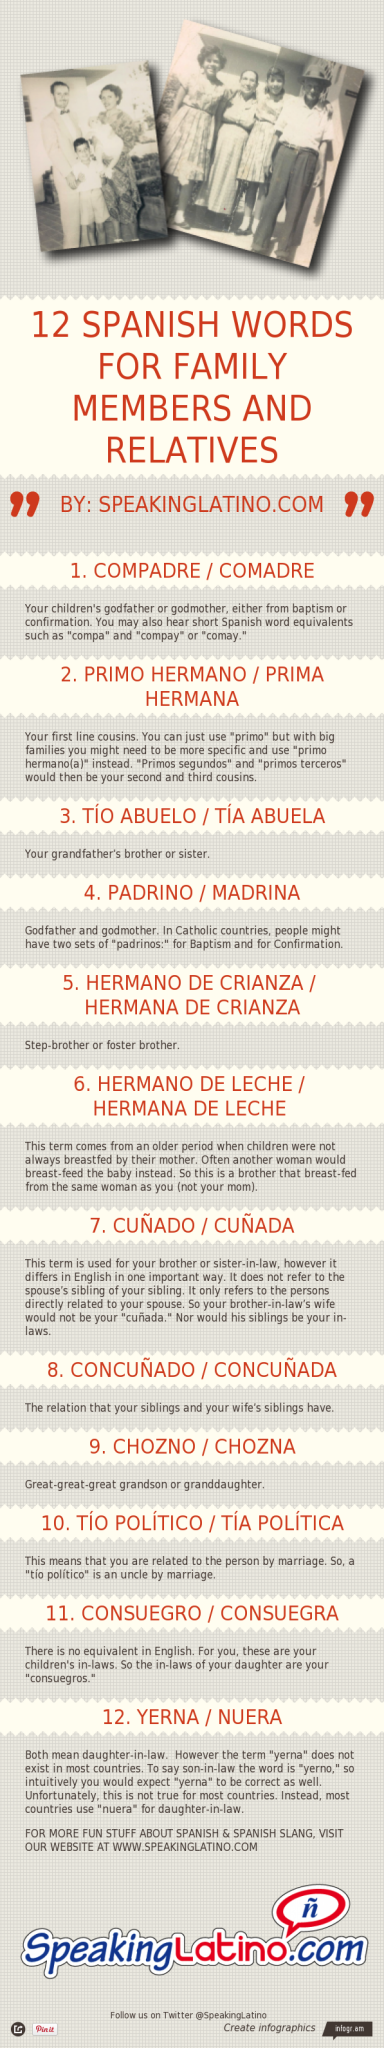 12 Spanish Words for Family Members and Relatives